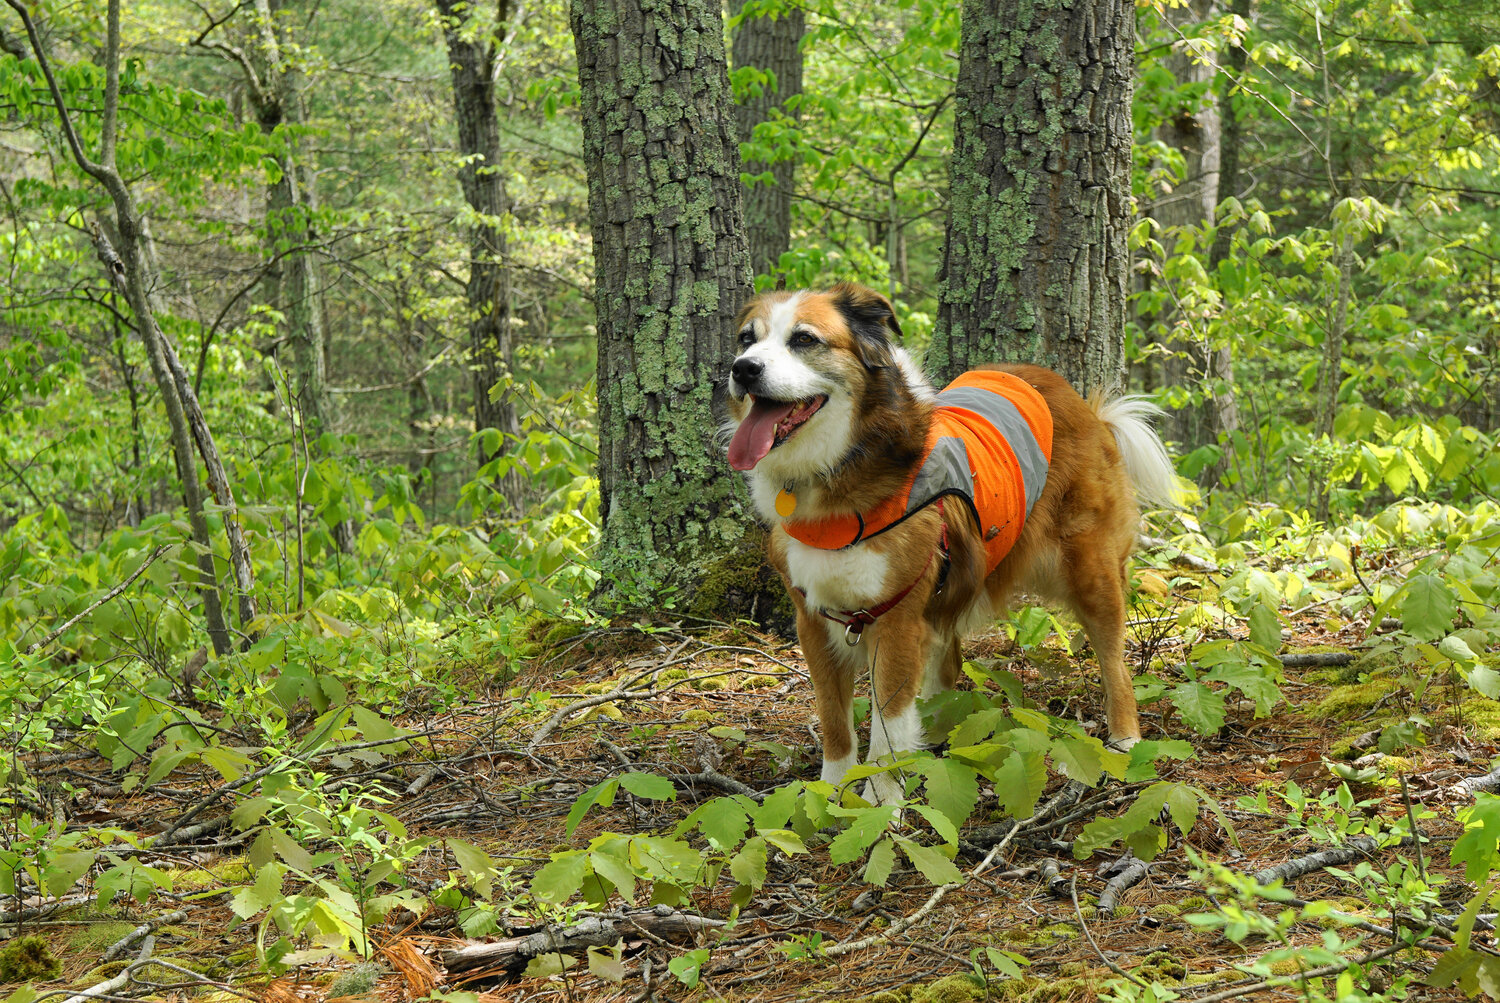 Keep dogs safe by outfitting in safety orange